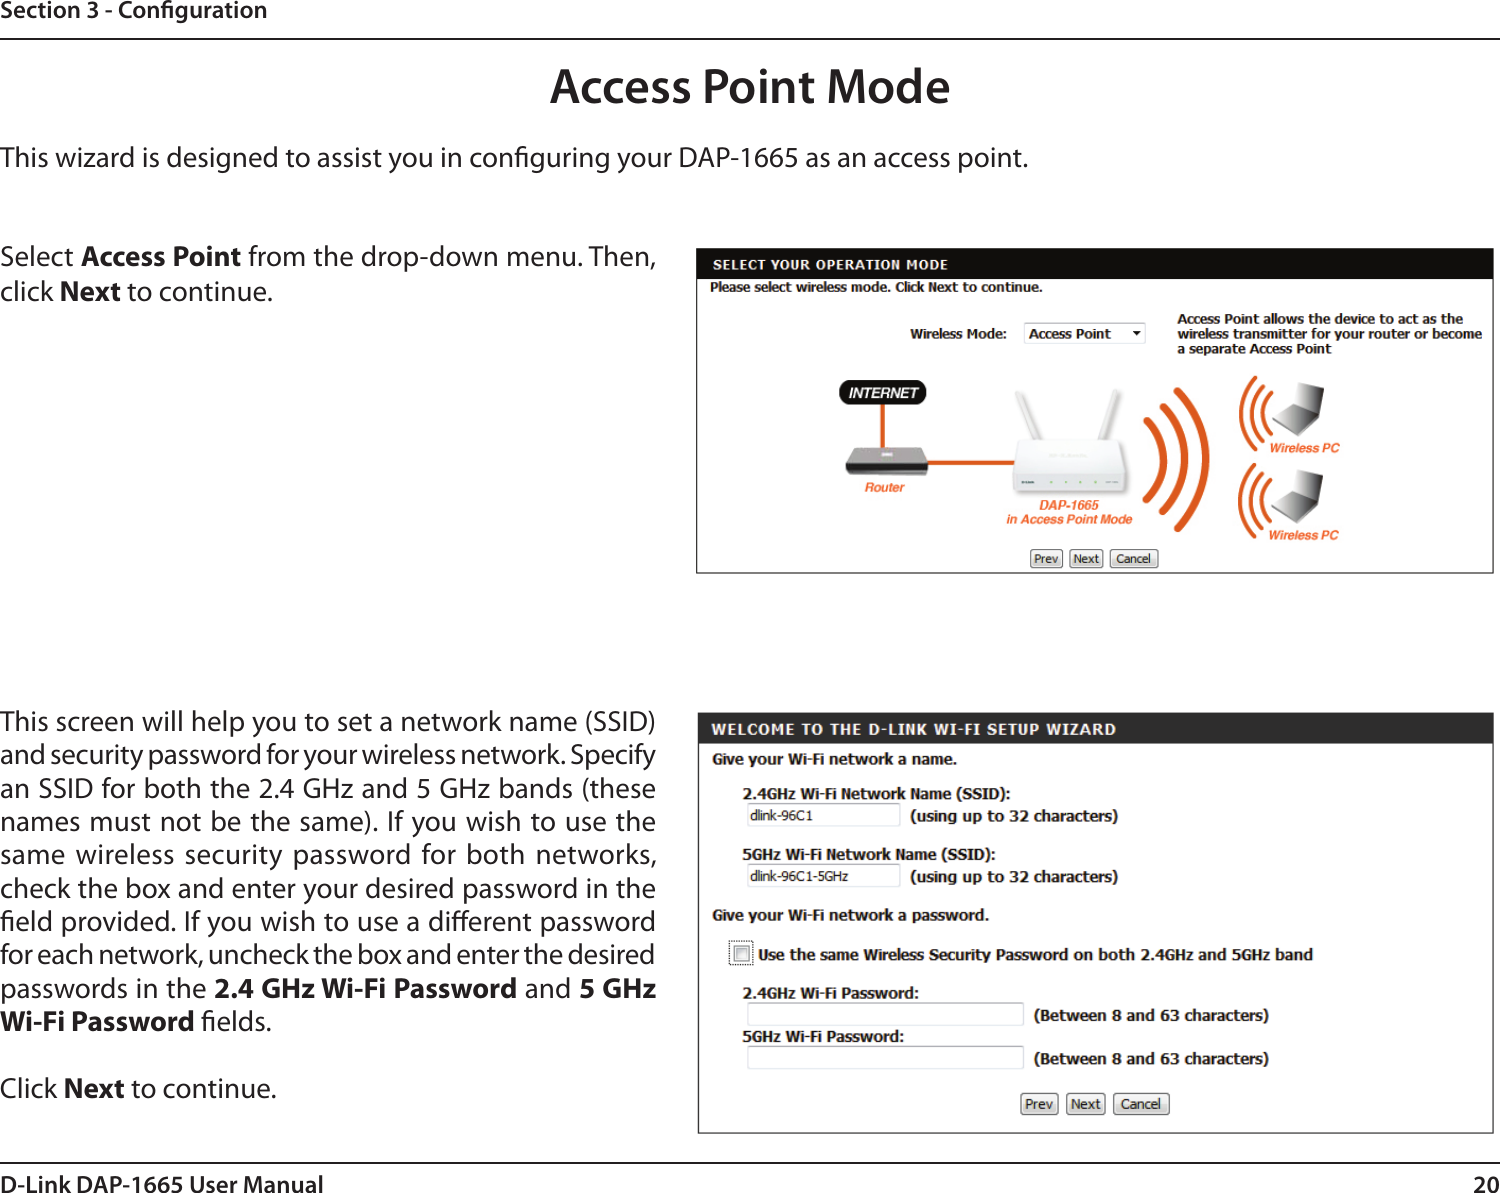 20D-Link DAP-1665 User ManualSection 3 - CongurationThis wizard is designed to assist you in conguring your DAP-1665 as an access point.Access Point ModeSelect Access Point from the drop-down menu. Then, click Next to continue. This screen will help you to set a network name (SSID) and security password for your wireless network. Specify an SSID for both the 2.4 GHz and 5 GHz bands (these names must not be the same). If you wish to use the same wireless security  password for  both networks, check the box and enter your desired password in the eld provided. If you wish to use a dierent password for each network, uncheck the box and enter the desired passwords in the 2.4 GHz Wi-Fi Password and 5 GHz Wi-Fi Password elds. Click Next to continue.